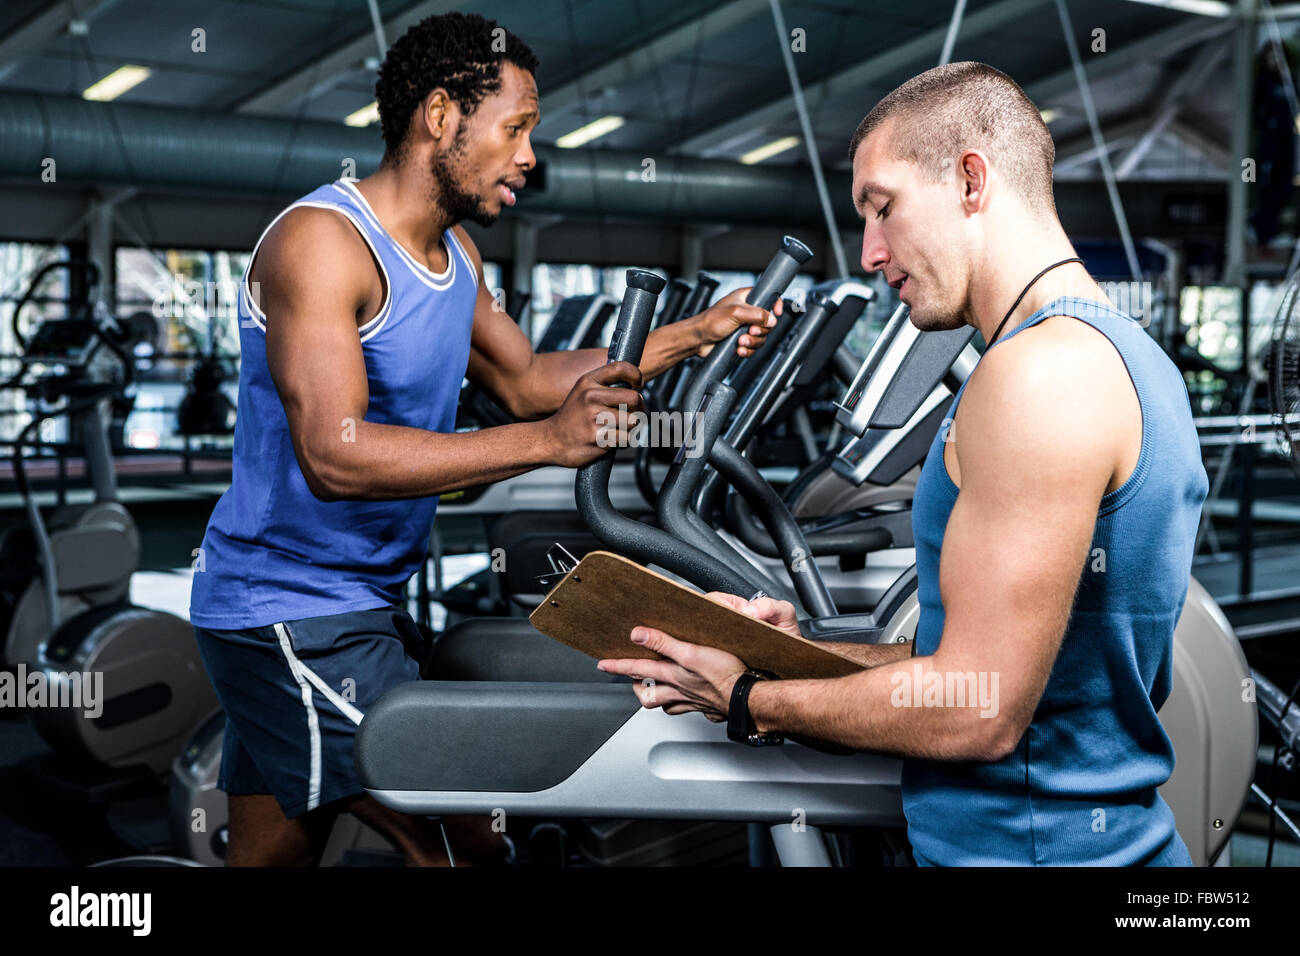 Muscular man using elliptical machine with trainer Stock Photo